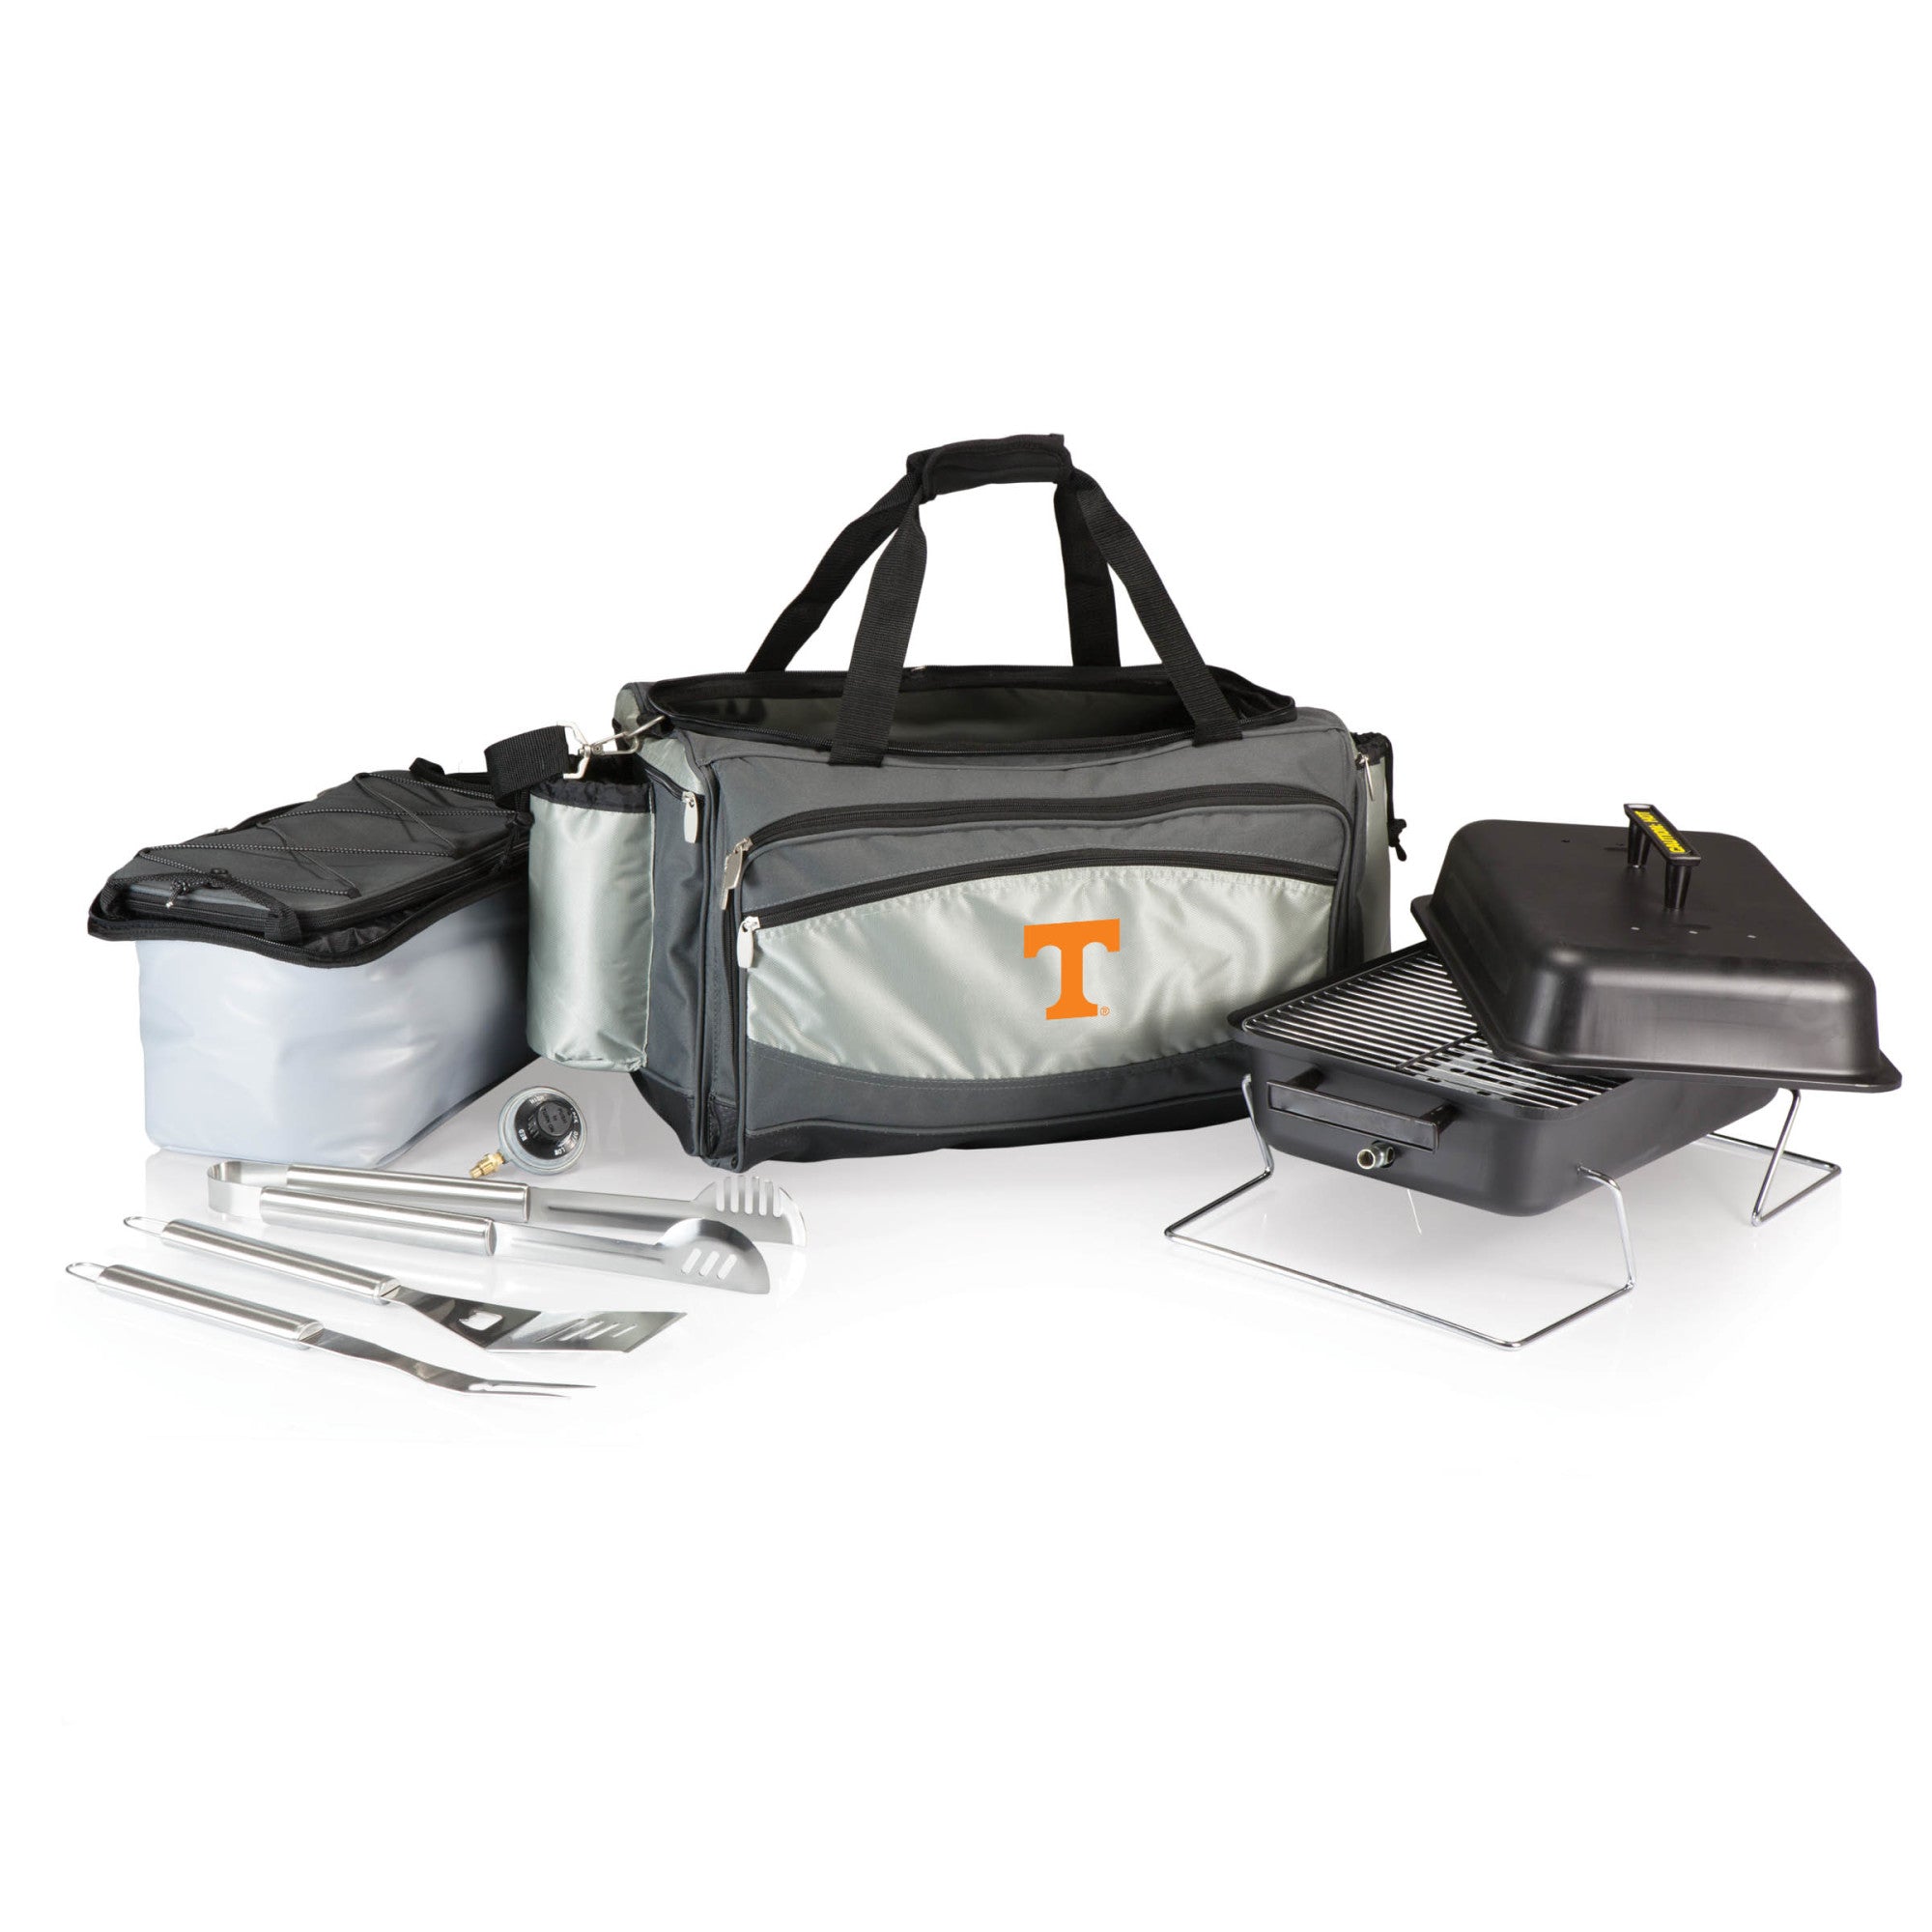 Tennessee Volunteers - Vulcan Portable Propane Grill & Cooler Tote